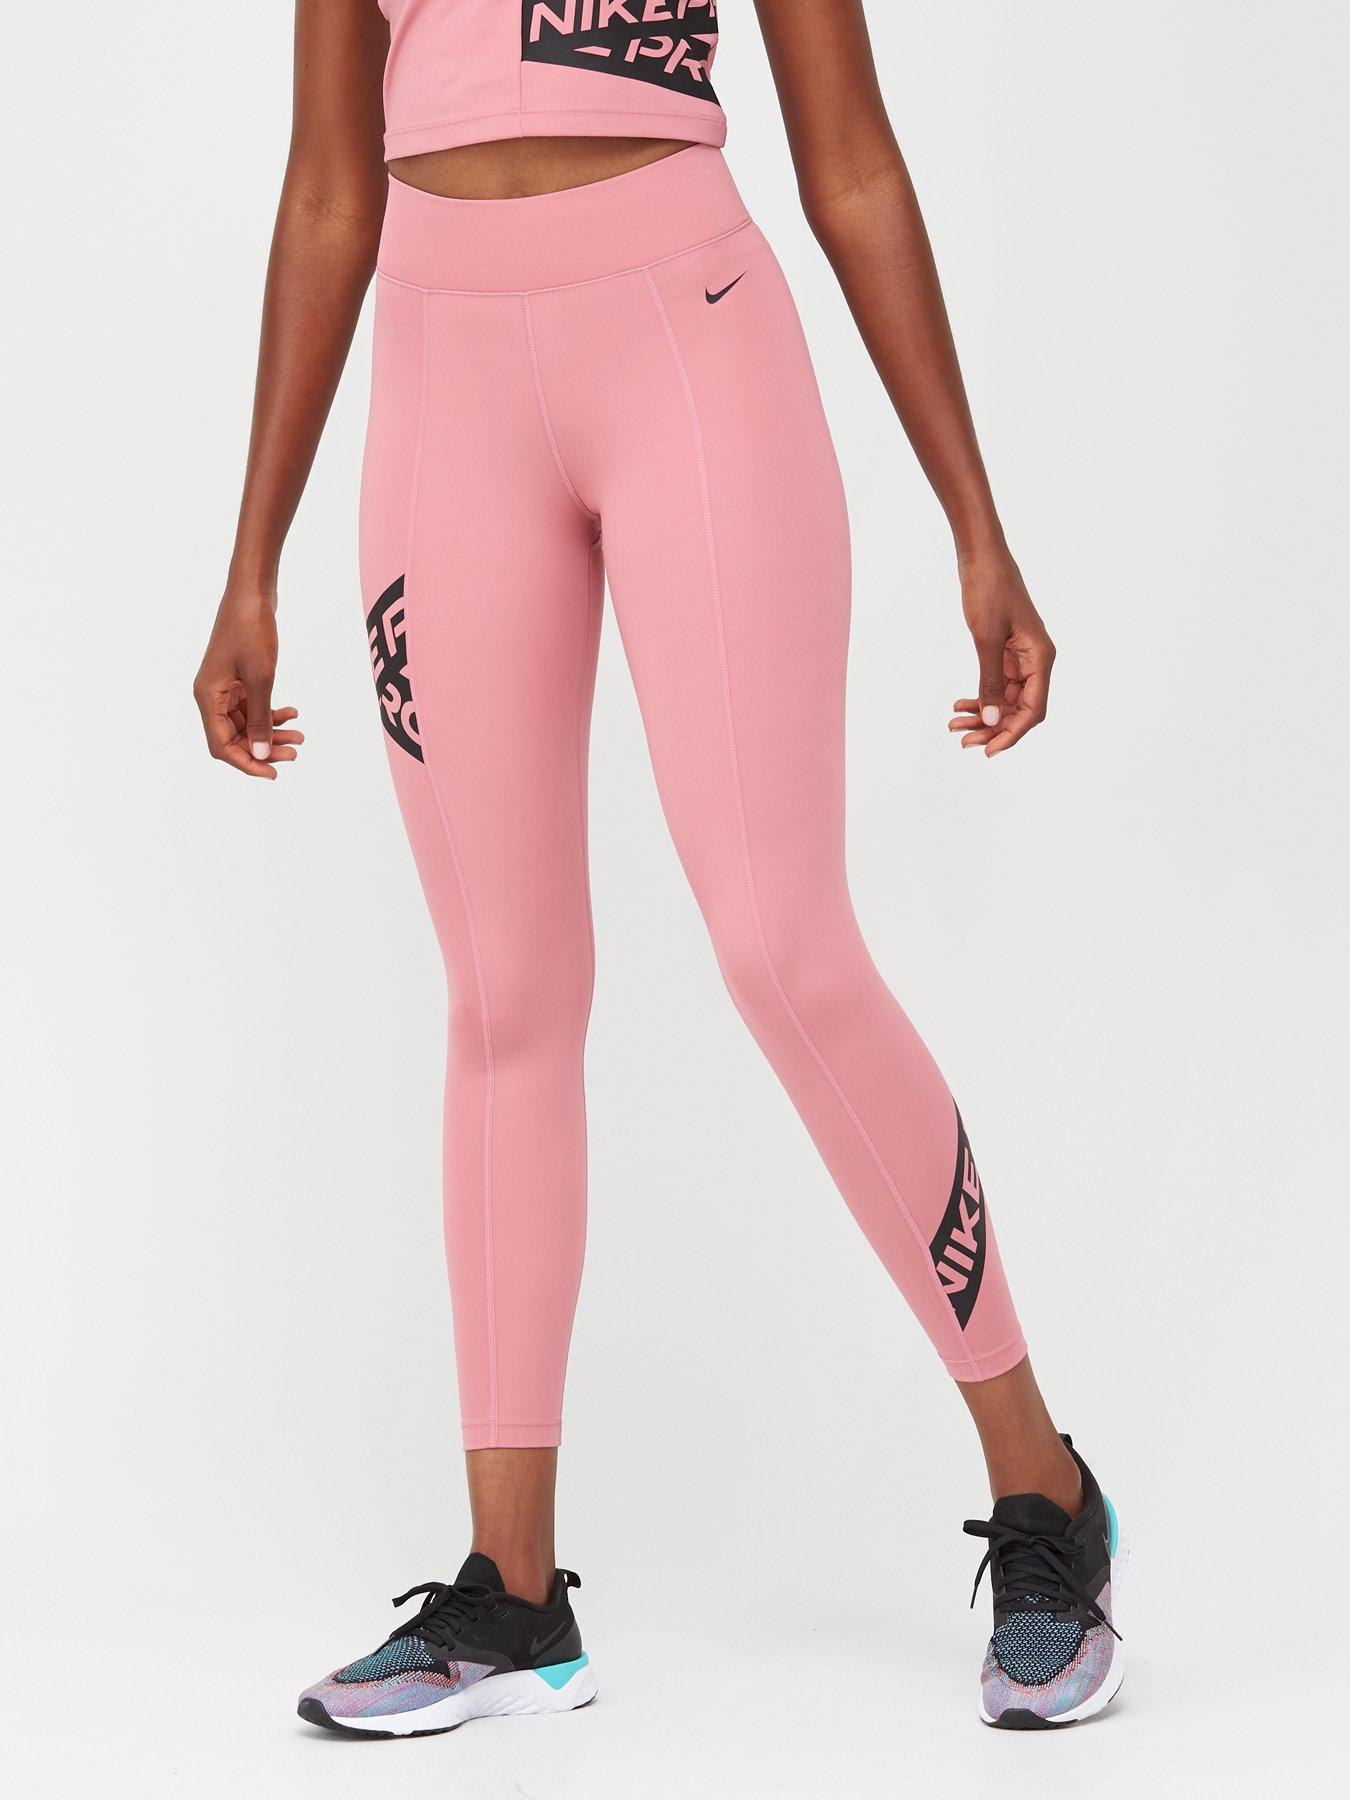 nike pro leggings with pink waistband